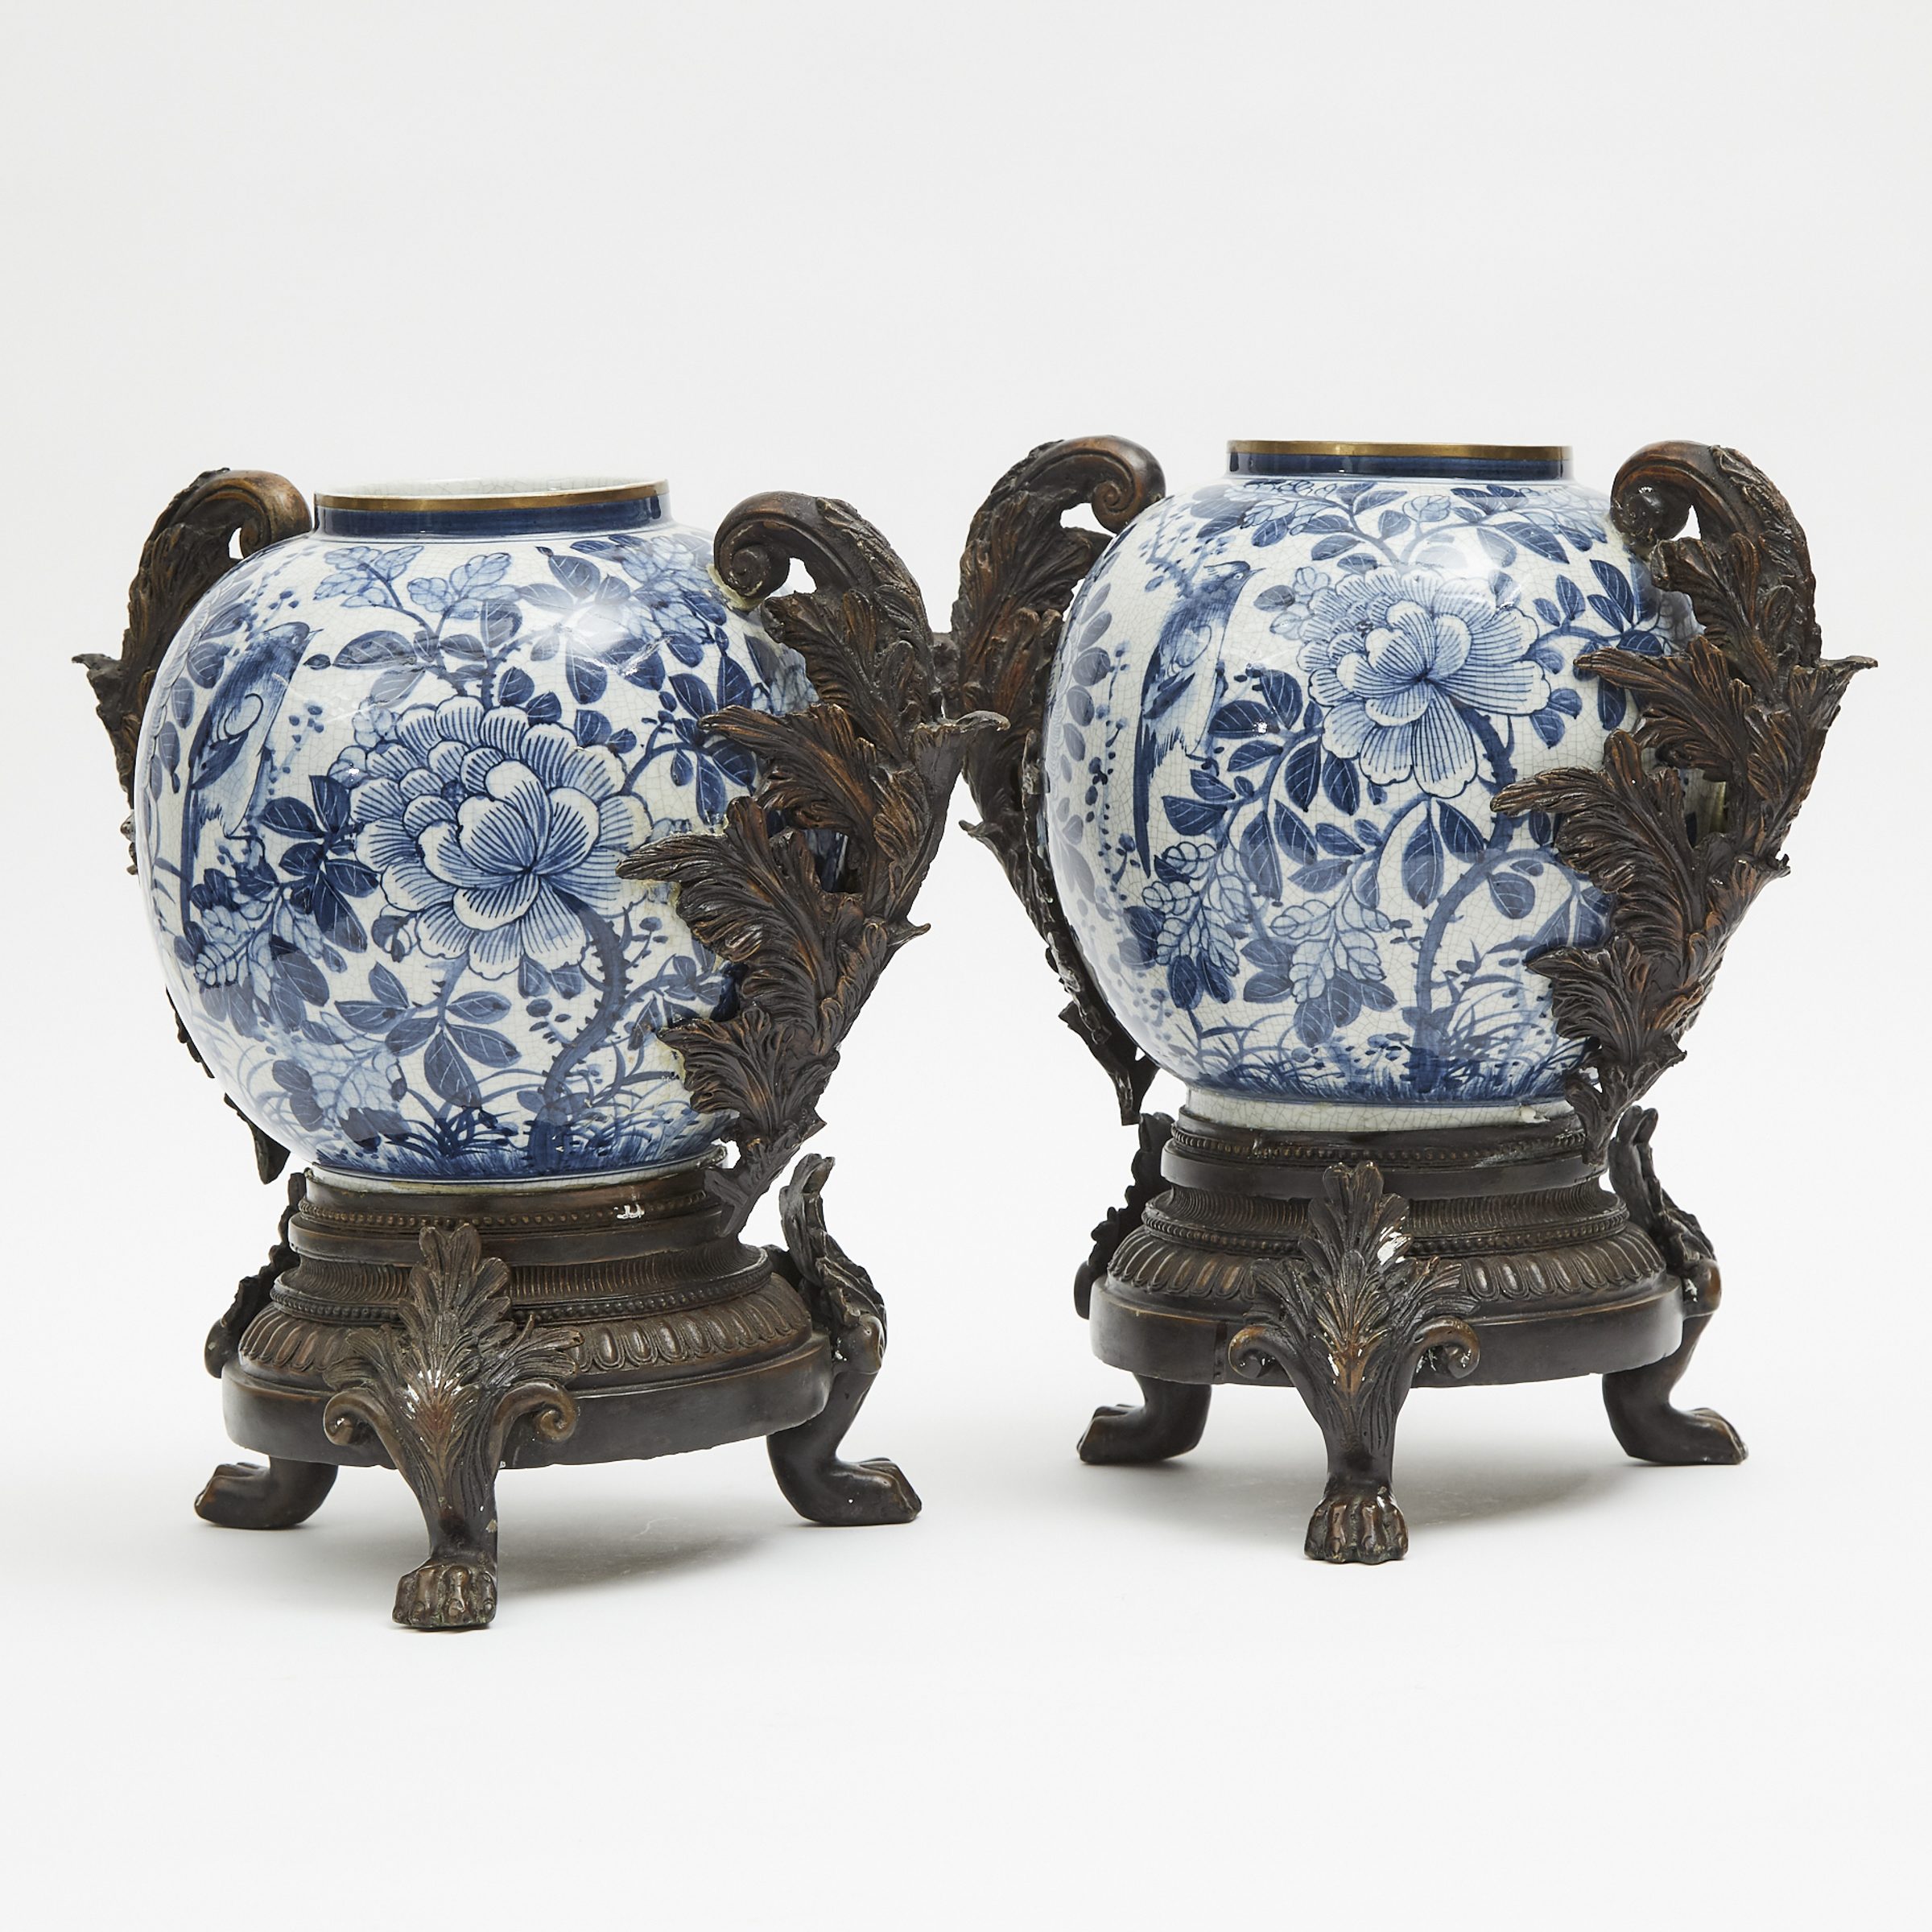 A Pair of Bronze Mounted Blue and White Vases